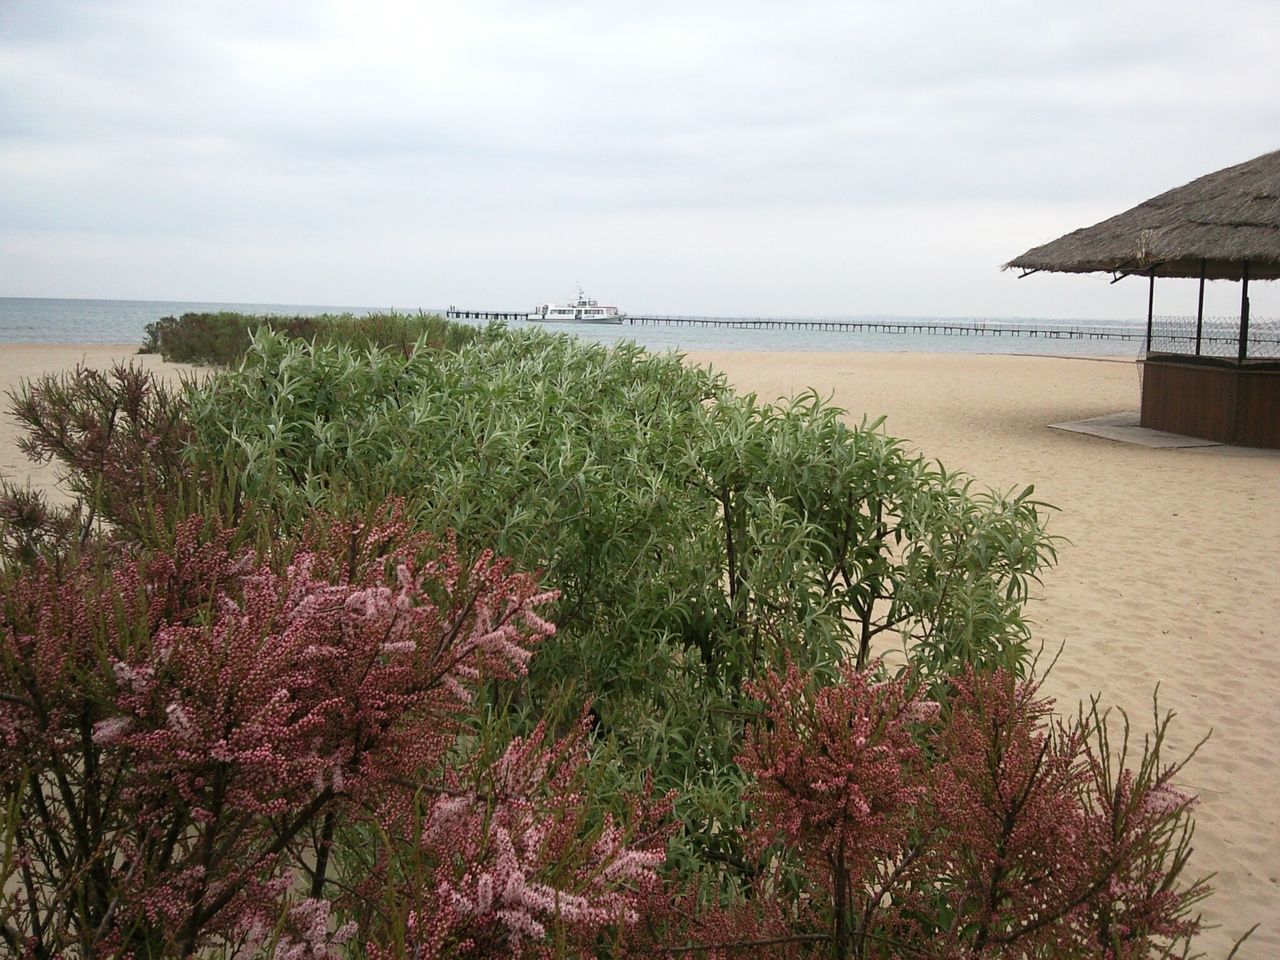 Plants on shore at beach